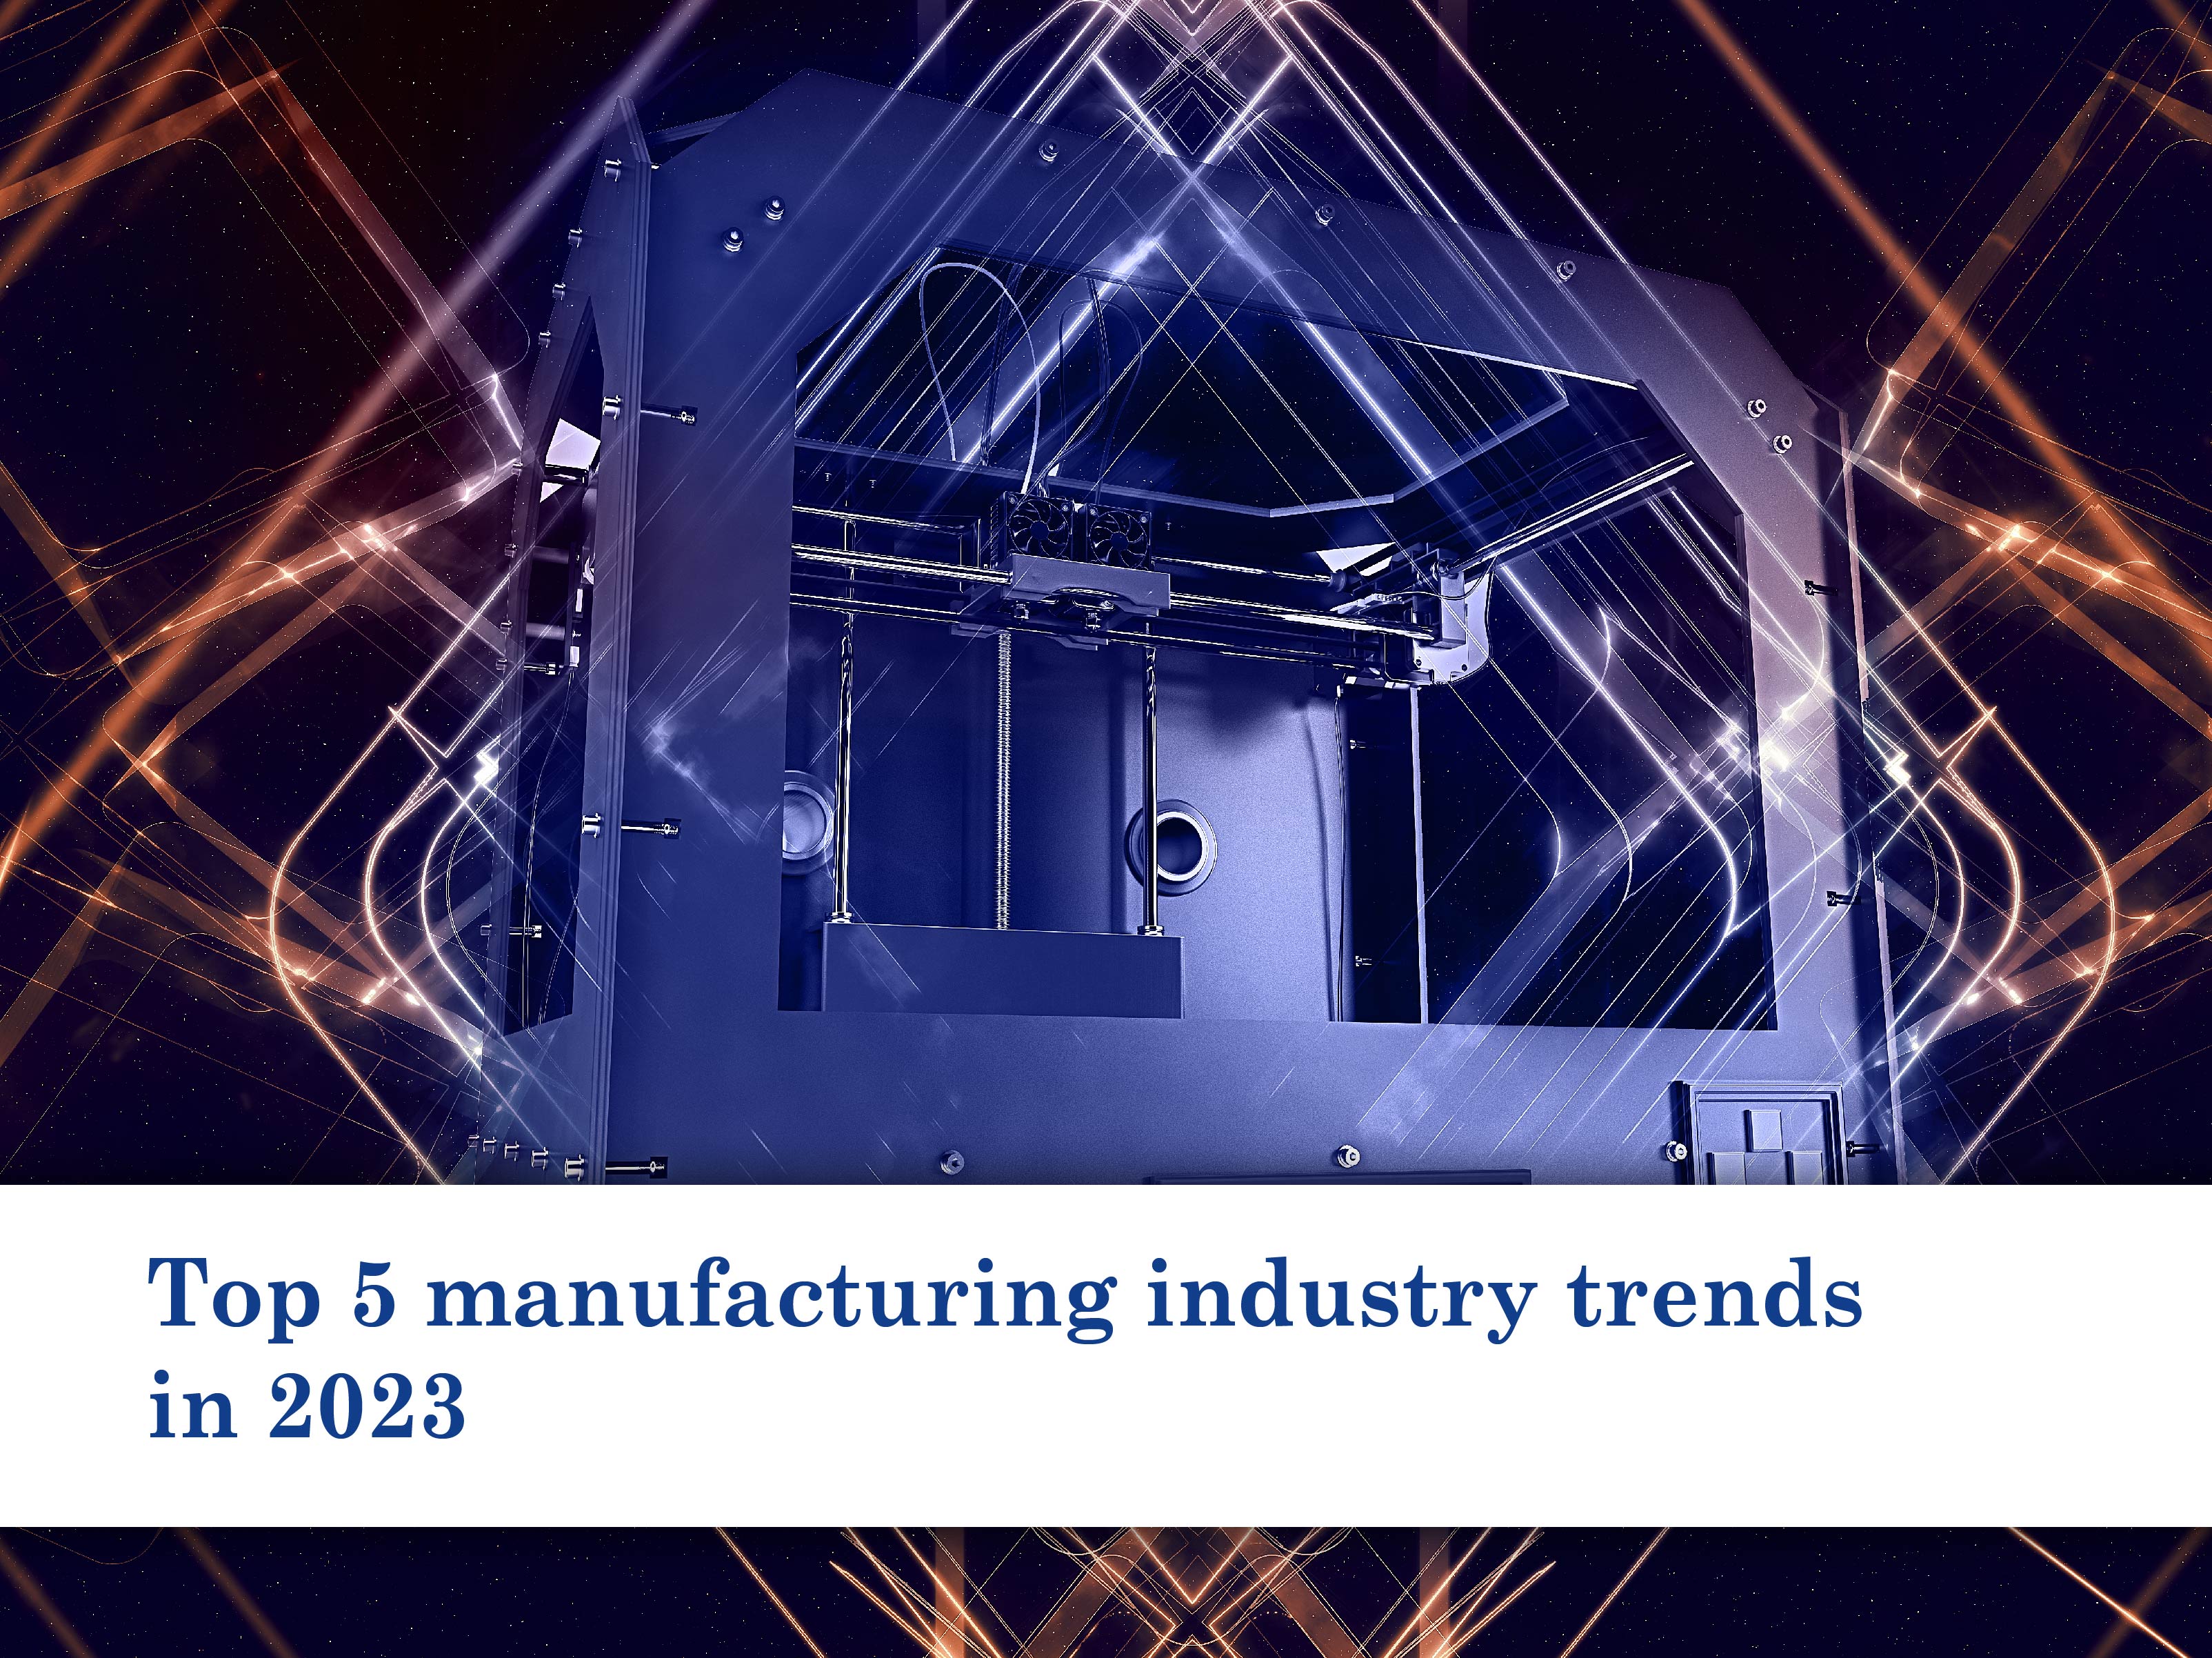 Top 5 manufacturing industry trends in 2023